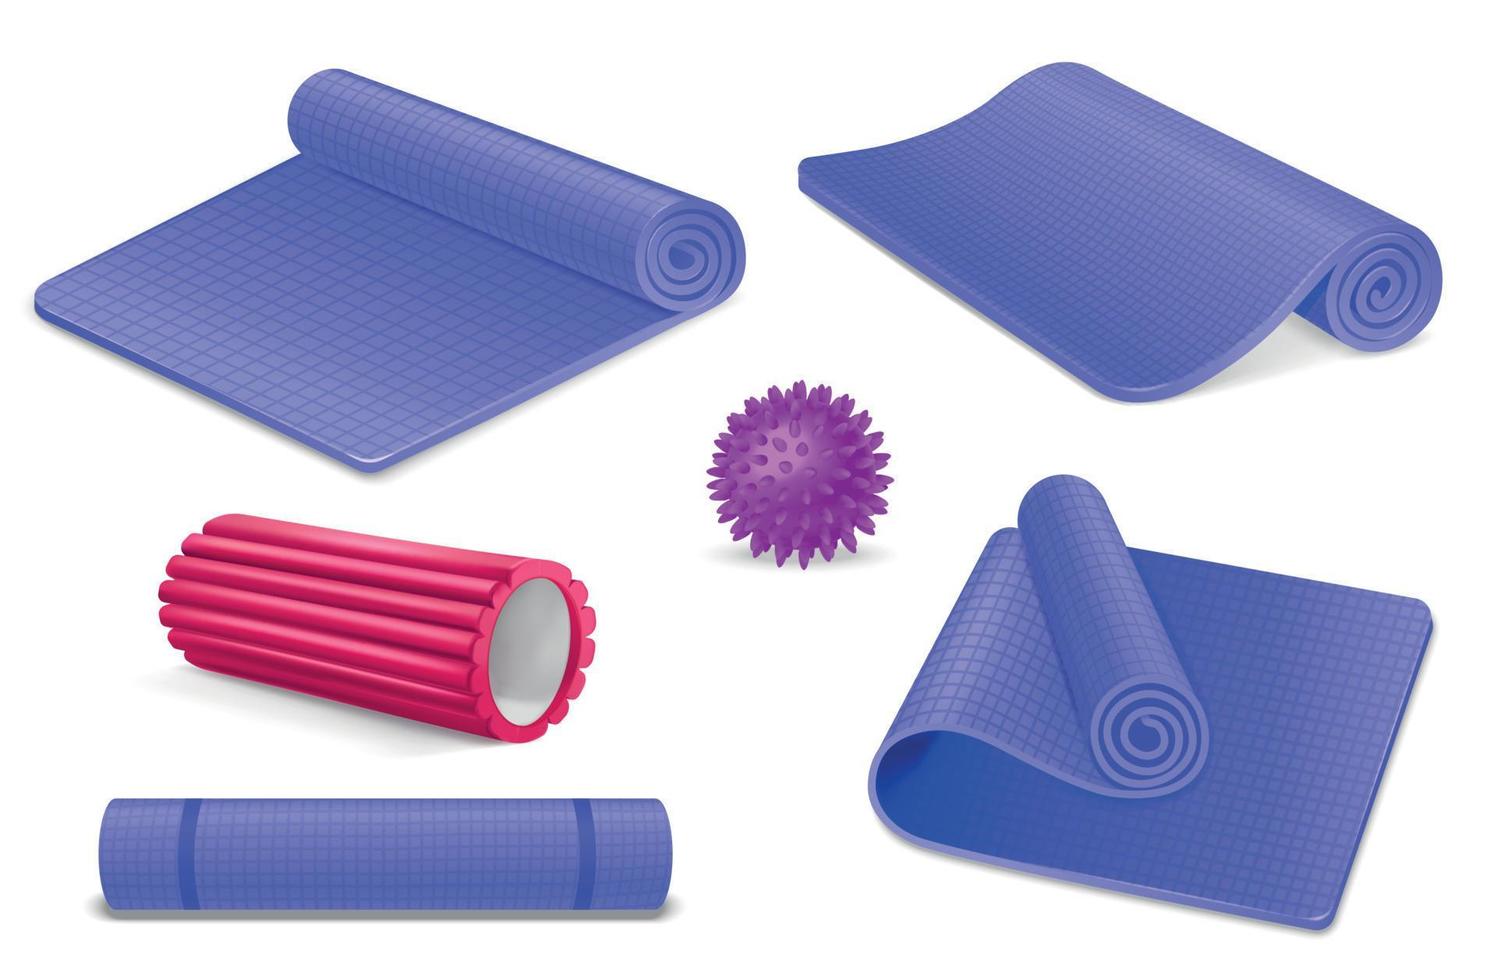 https://static.vecteezy.com/system/resources/previews/019/543/066/non_2x/realistic-yoga-and-massage-equipment-set-vector.jpg